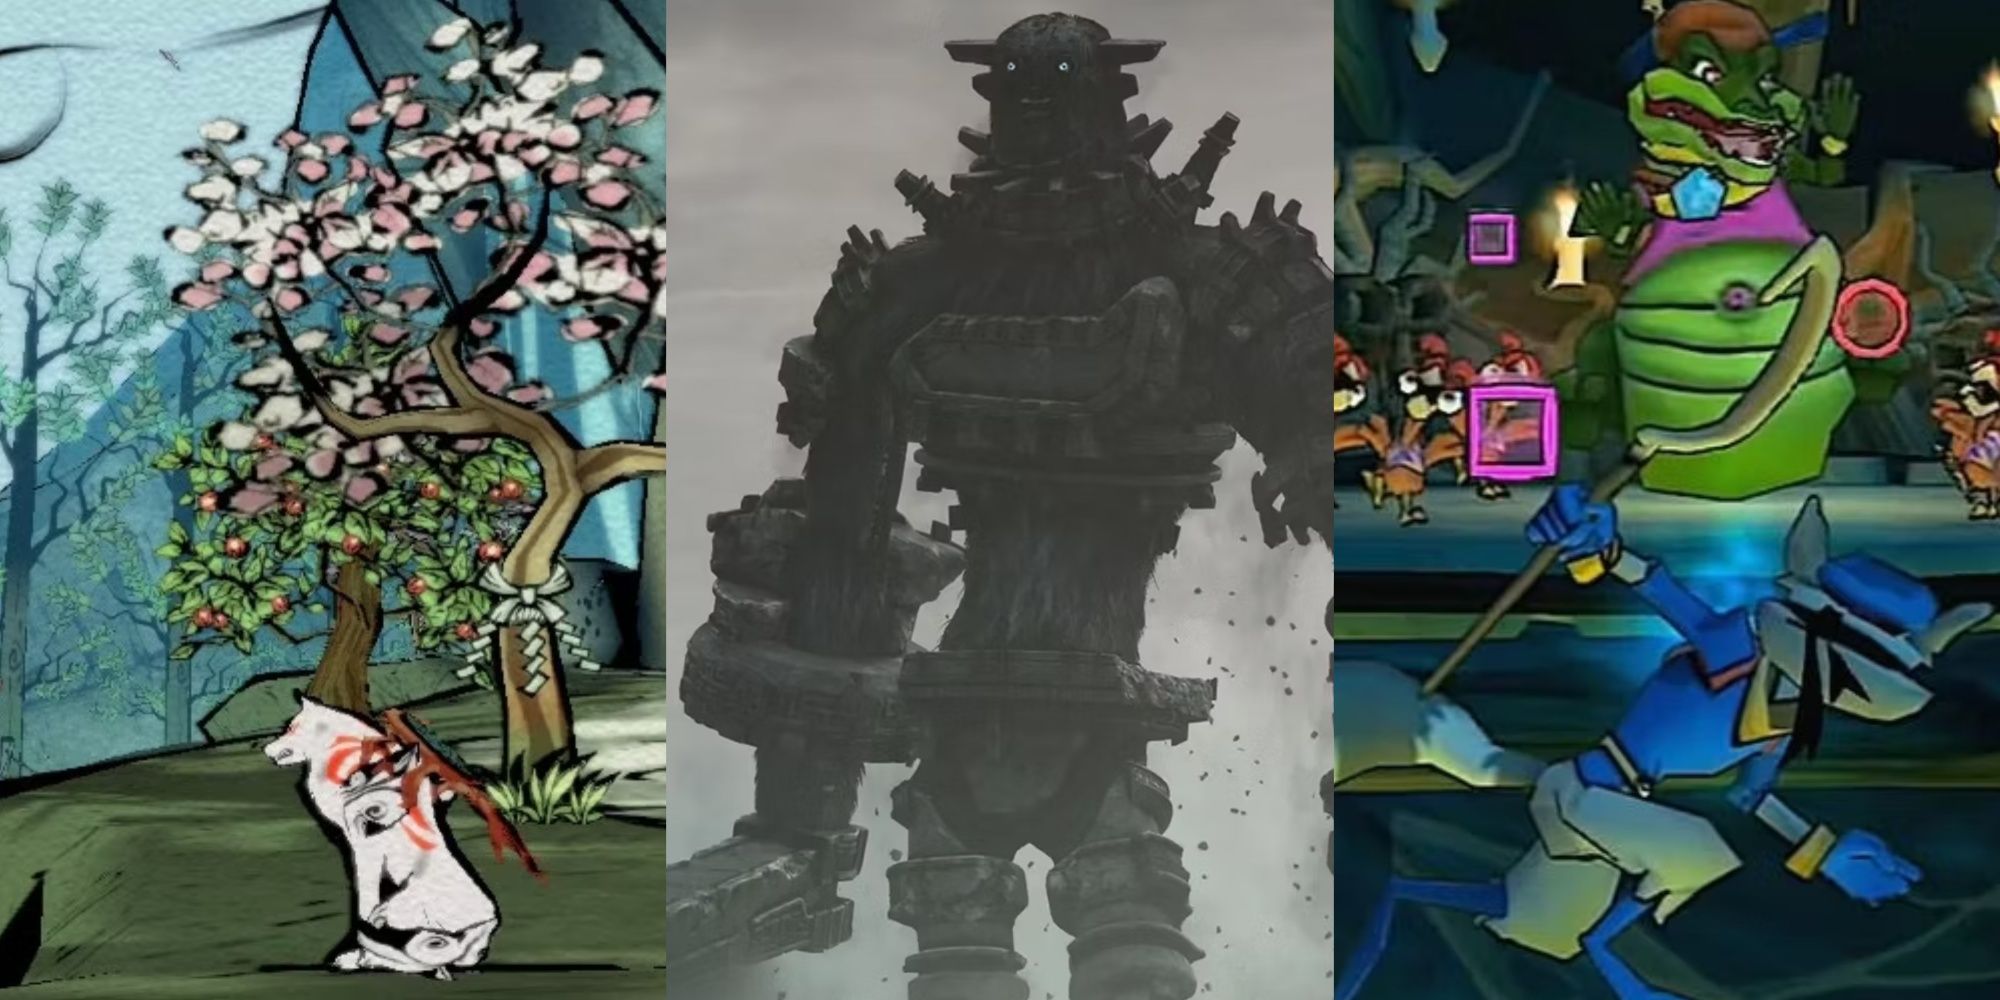 Split images of Okami, Shadow of the Colossus, and Sly Cooper.